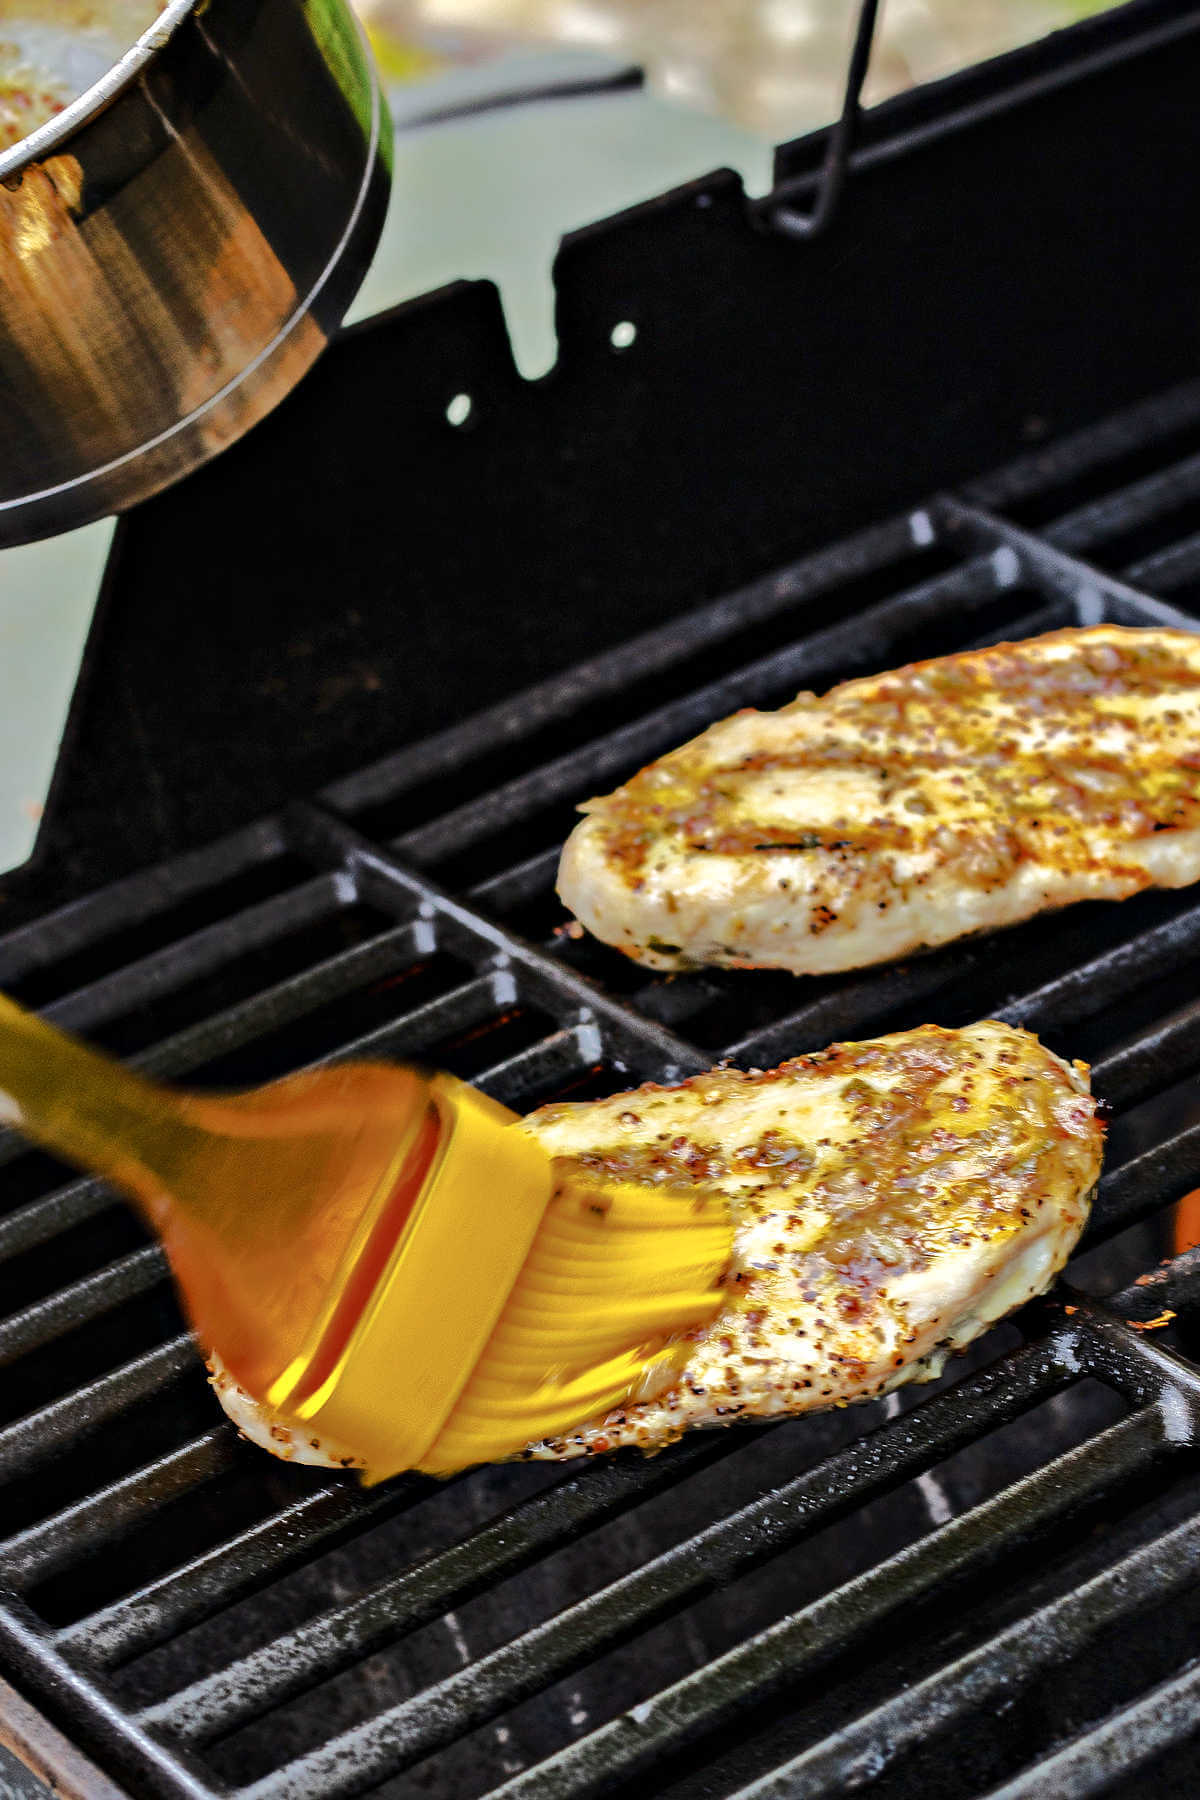 basting chicken on a grill with Carrabba's grill baste sauce.